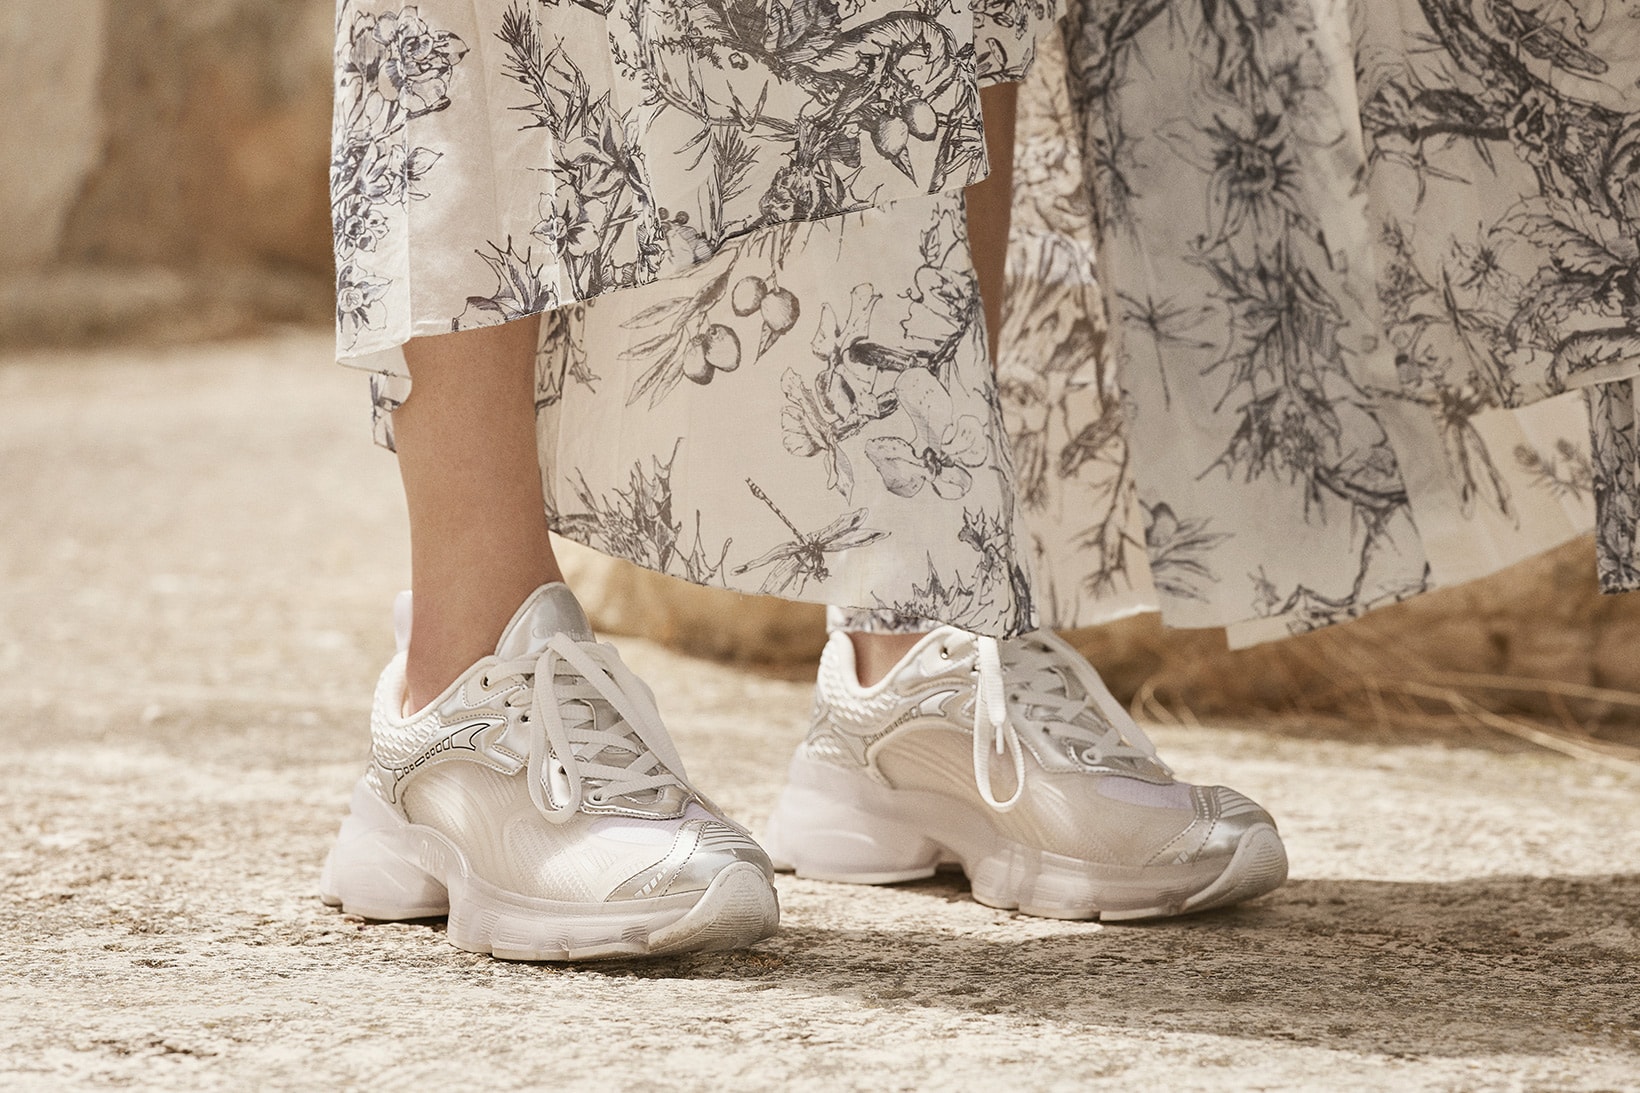 Dior Cruise 2022 Paired Gowns With Sneakers